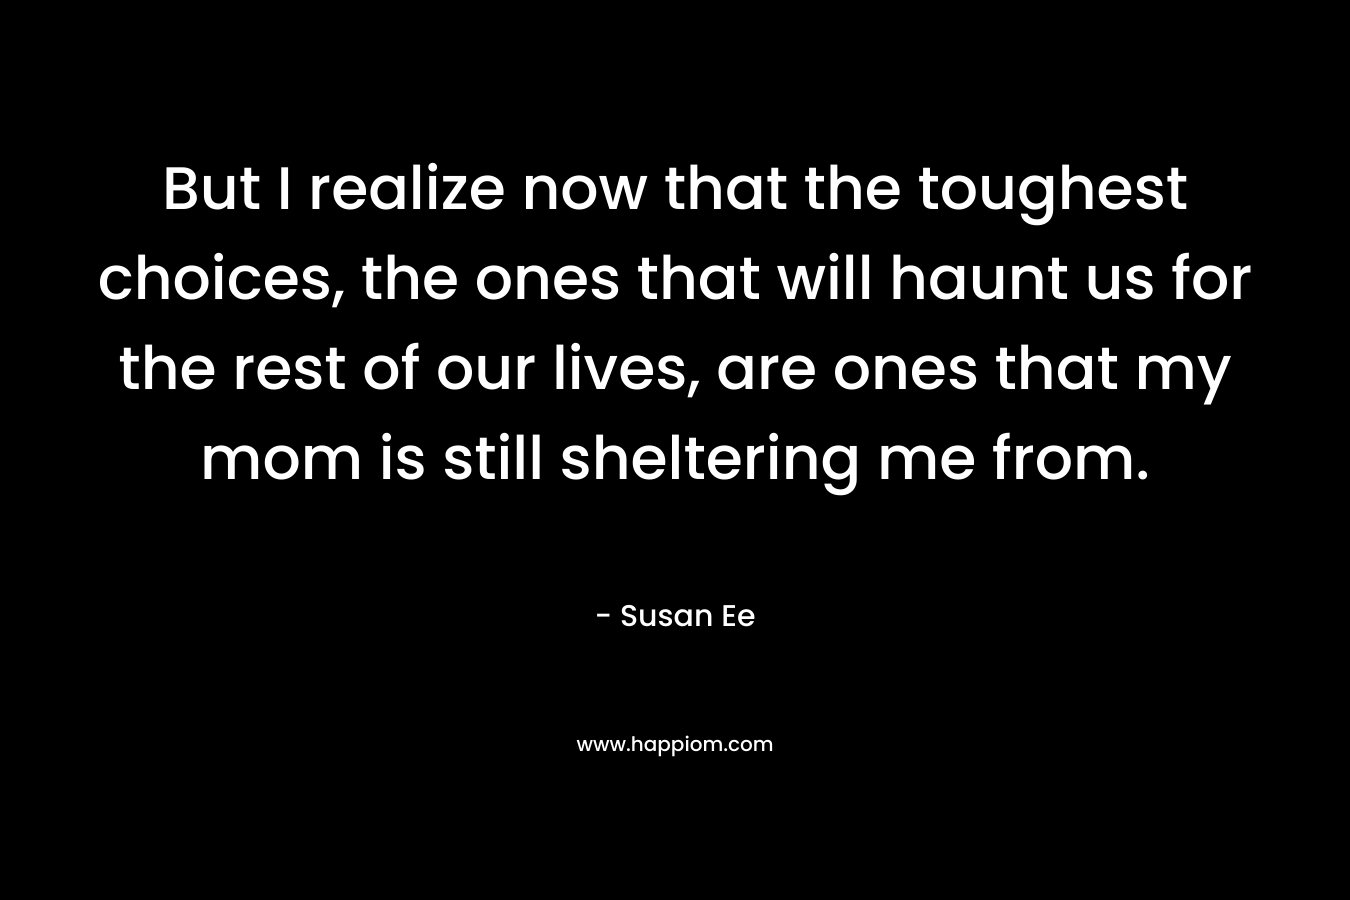 But I realize now that the toughest choices, the ones that will haunt us for the rest of our lives, are ones that my mom is still sheltering me from.